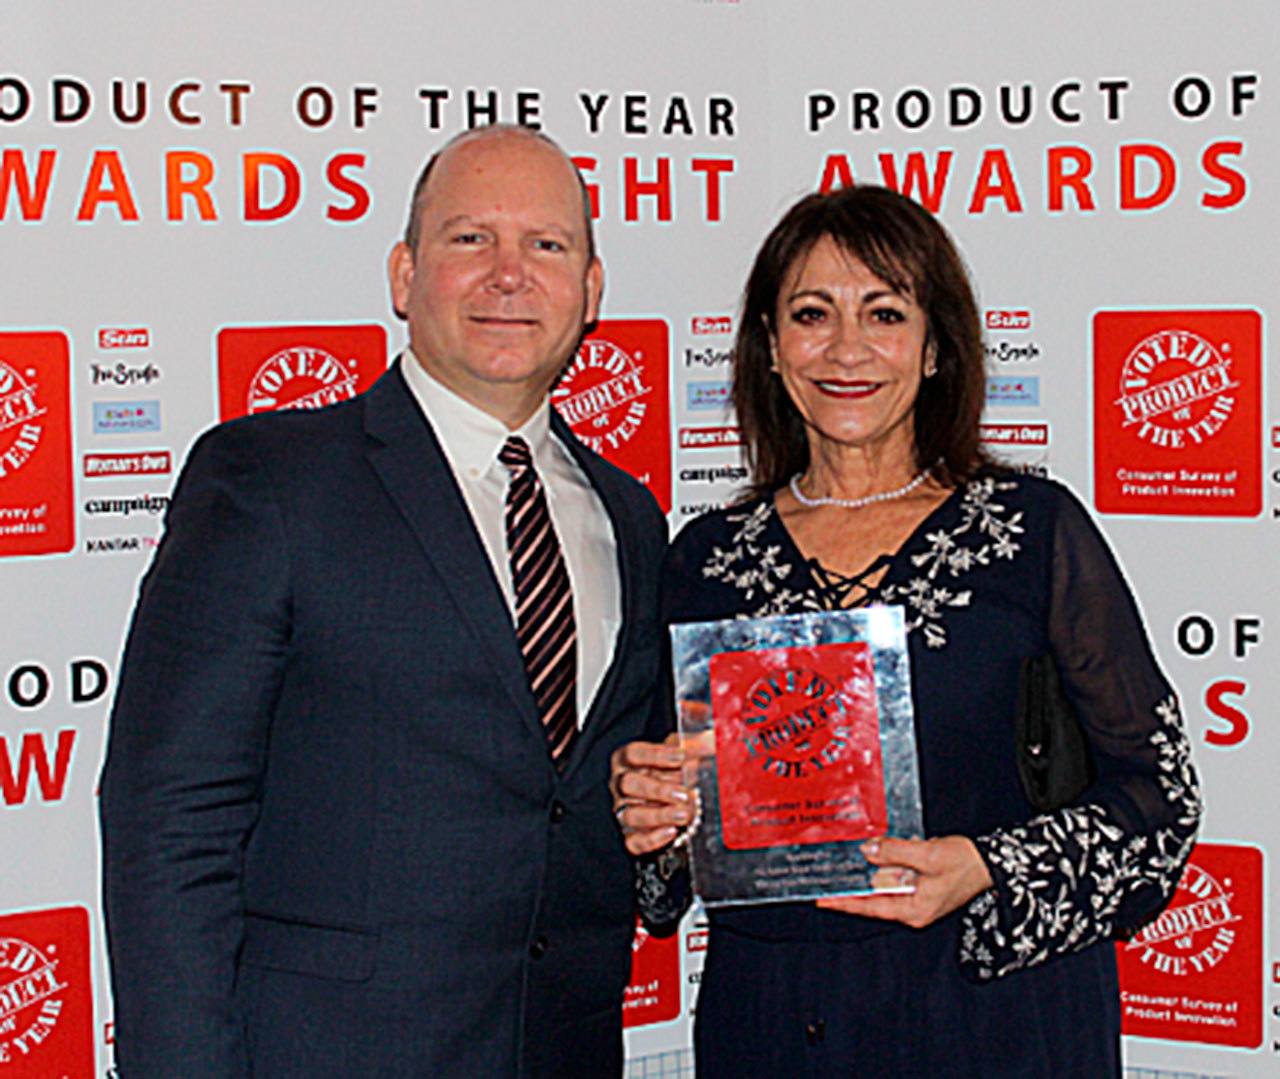 Sparkling Ice named Product of the Year in U.K. annual awards